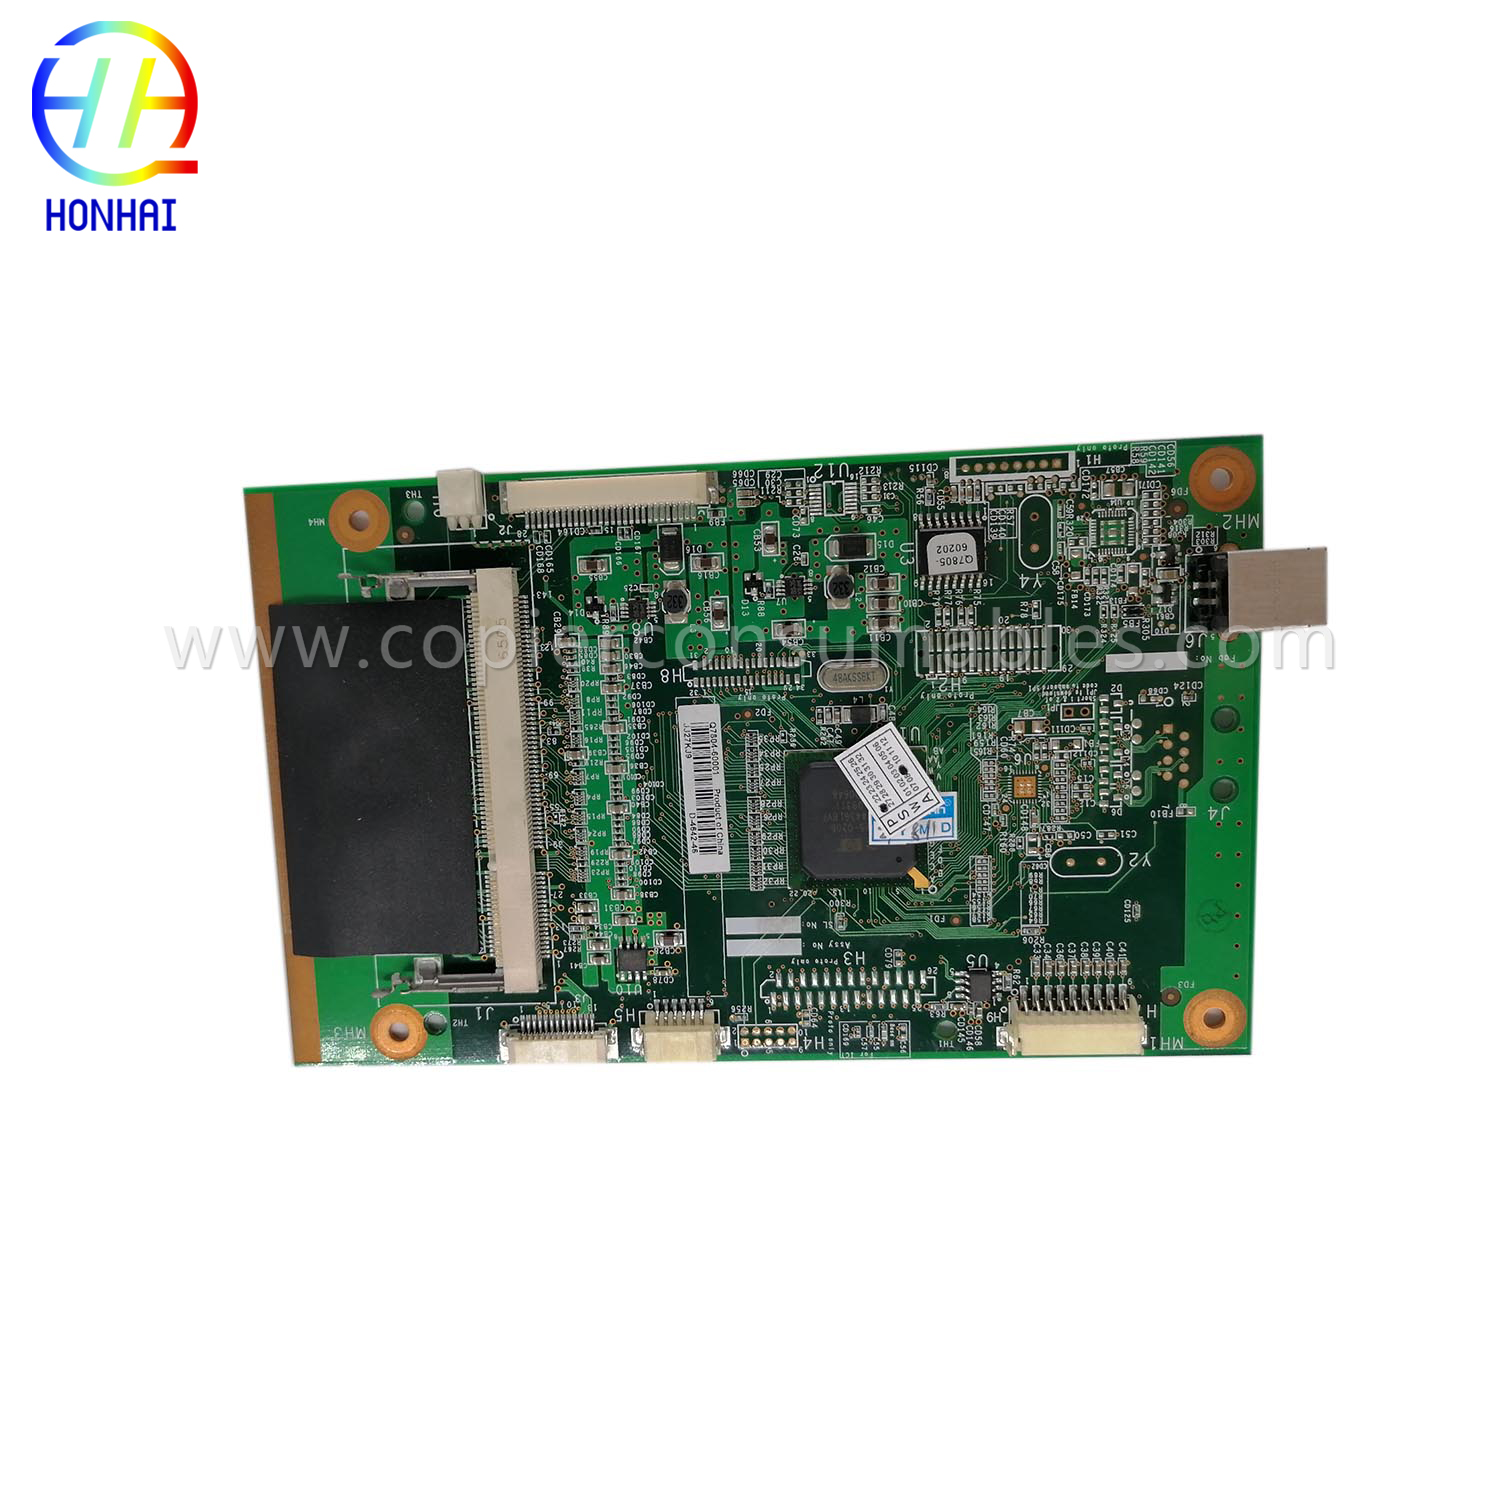 MAIN BOARD FOR HP Laser jet 2015 (1) 拷贝